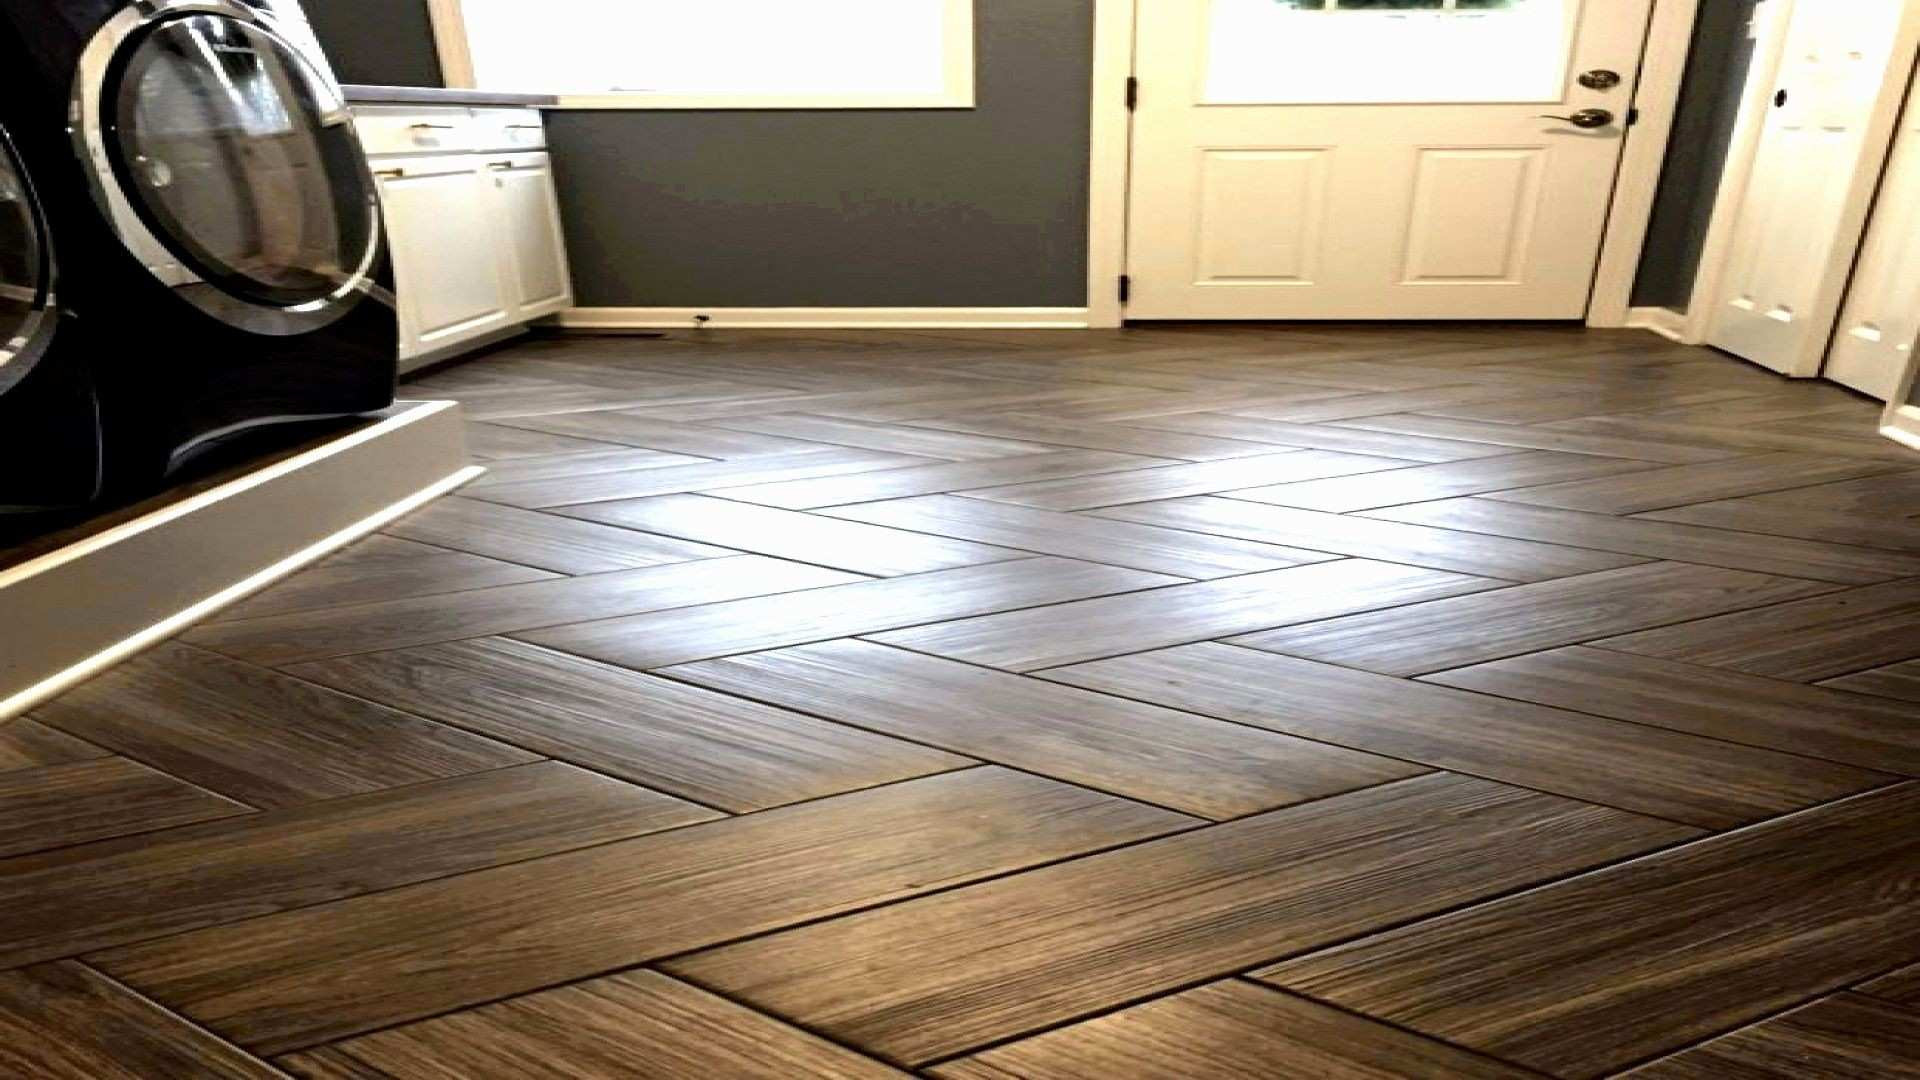 14 Fabulous How Do You Install Engineered Hardwood Floors On Concrete 2024 free download how do you install engineered hardwood floors on concrete of laminate flooring vs wood elegant wood flooring vs laminate regarding laminate flooring vs wood lovely 40 best way to remove viny